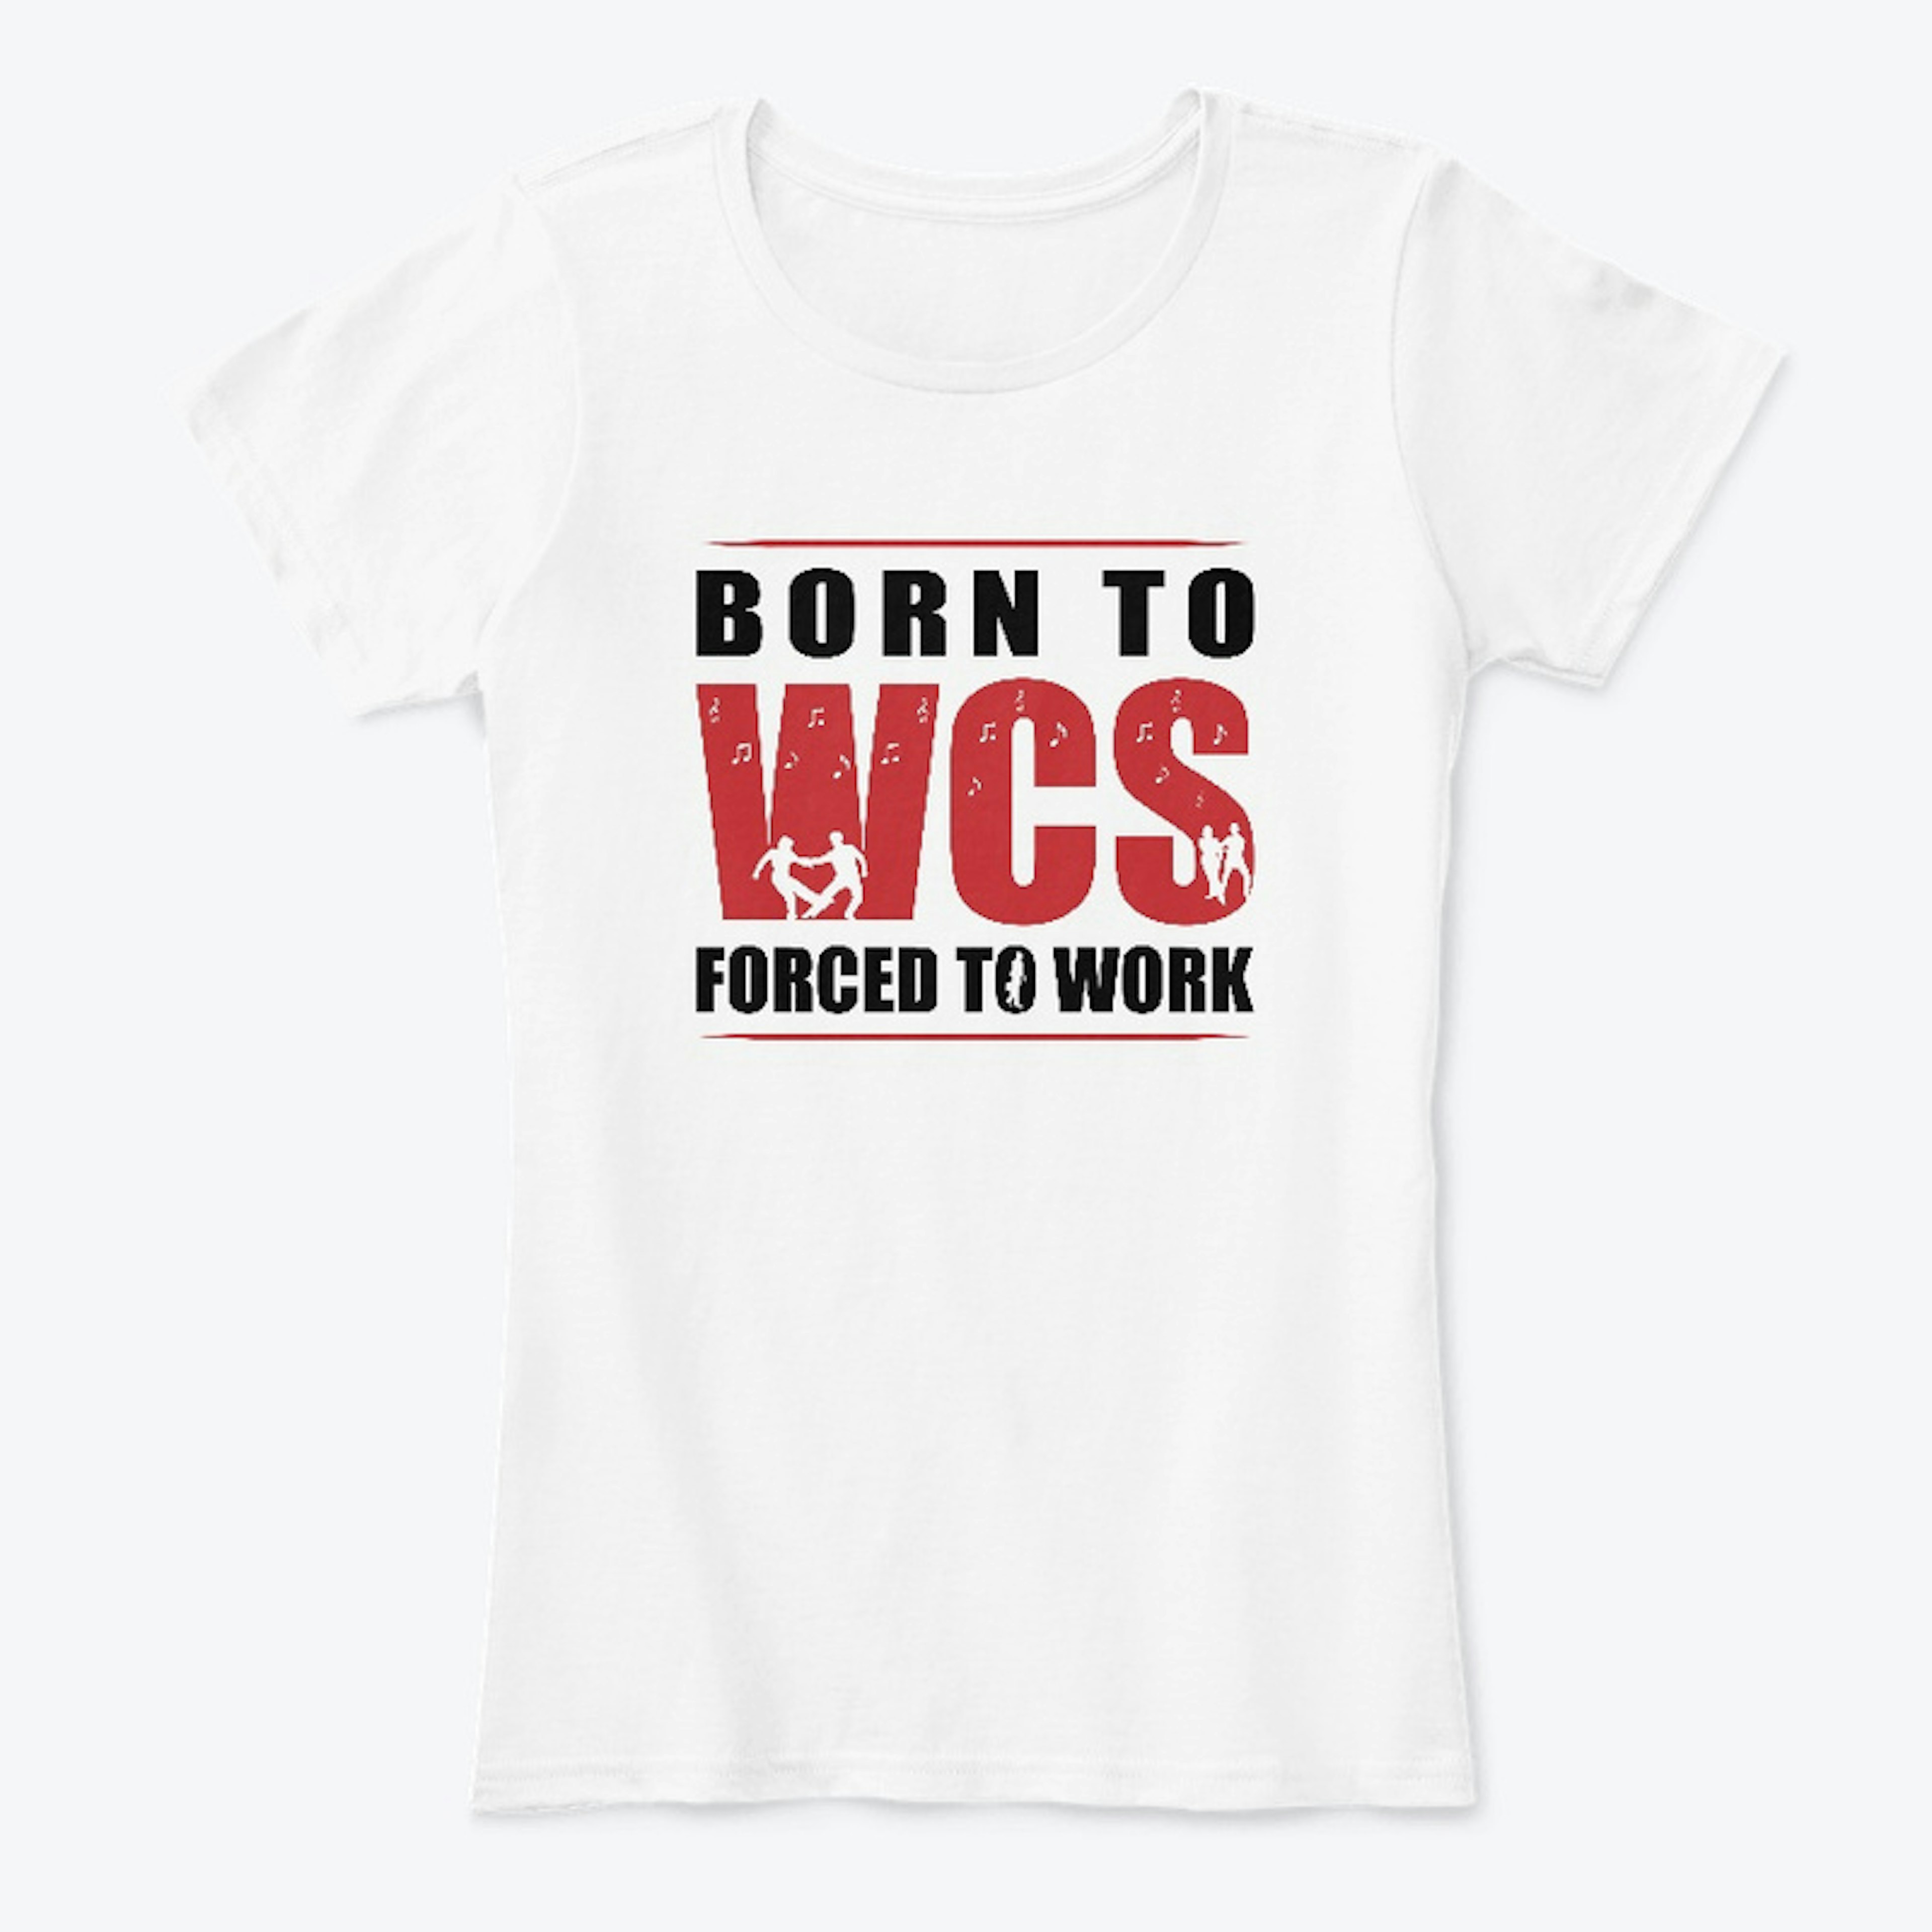 Born to WCS